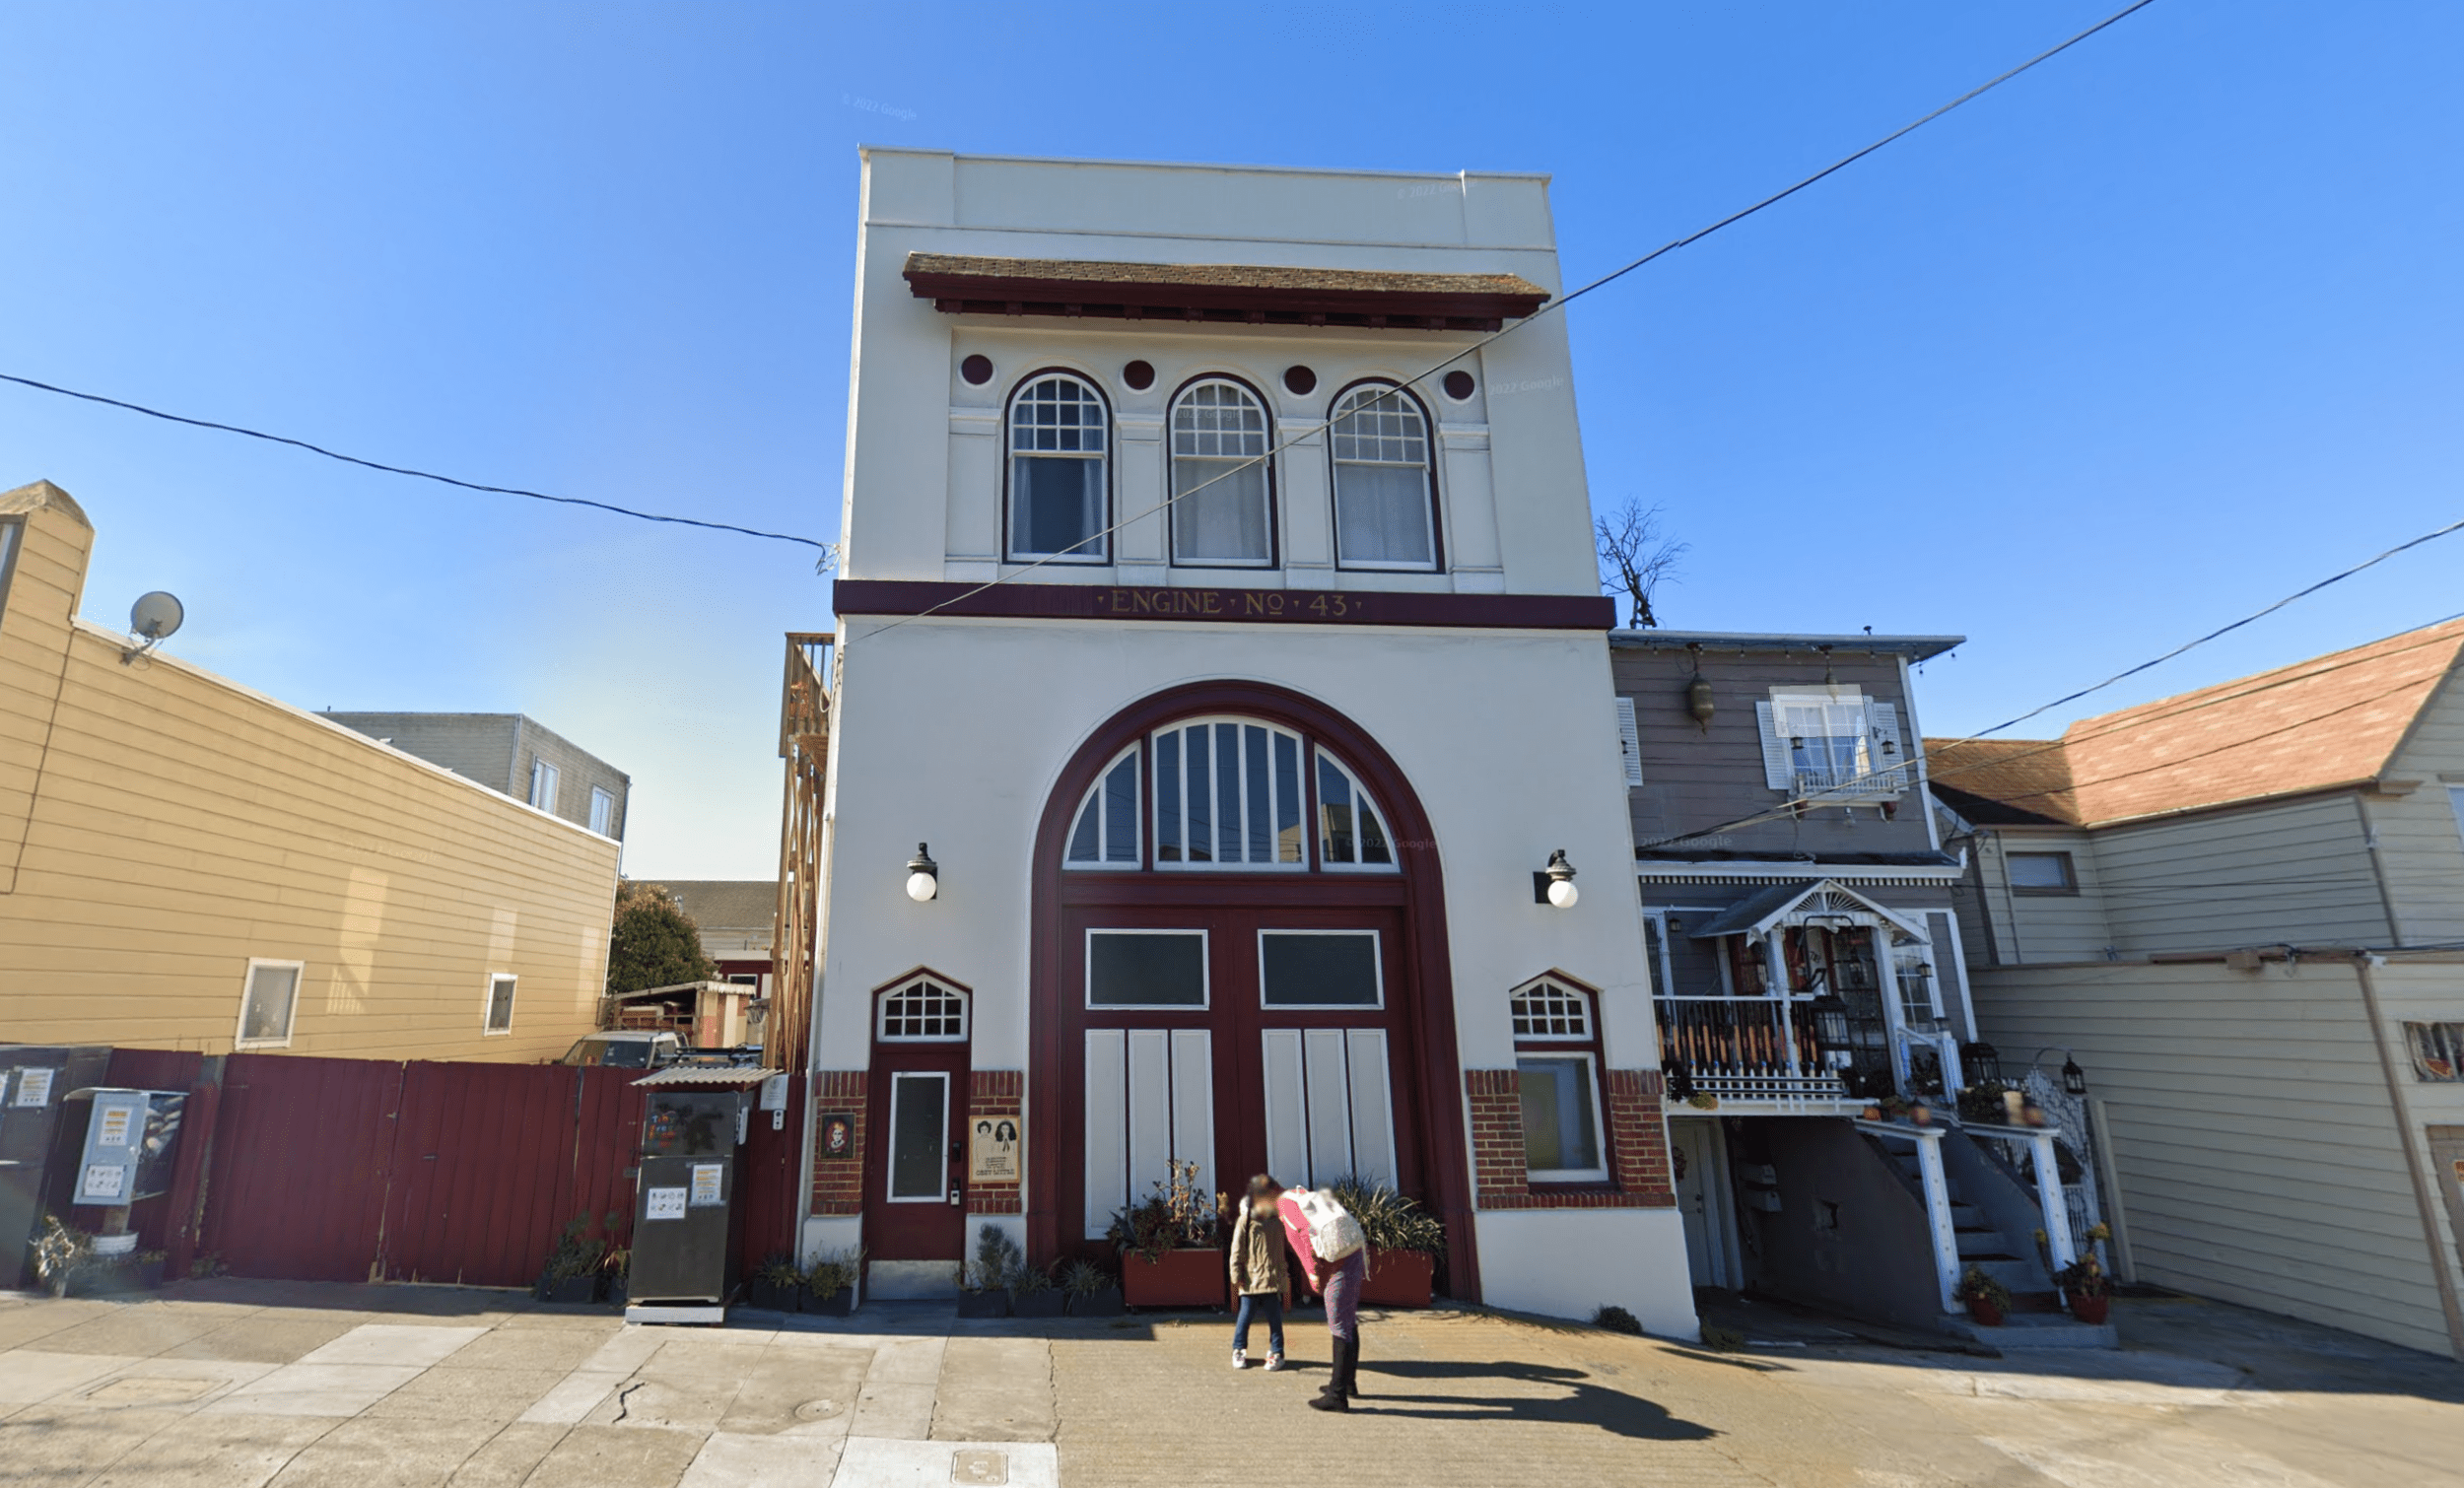 The exterior of a decommissioned firehouse in the Excelsior District of San Francisco.